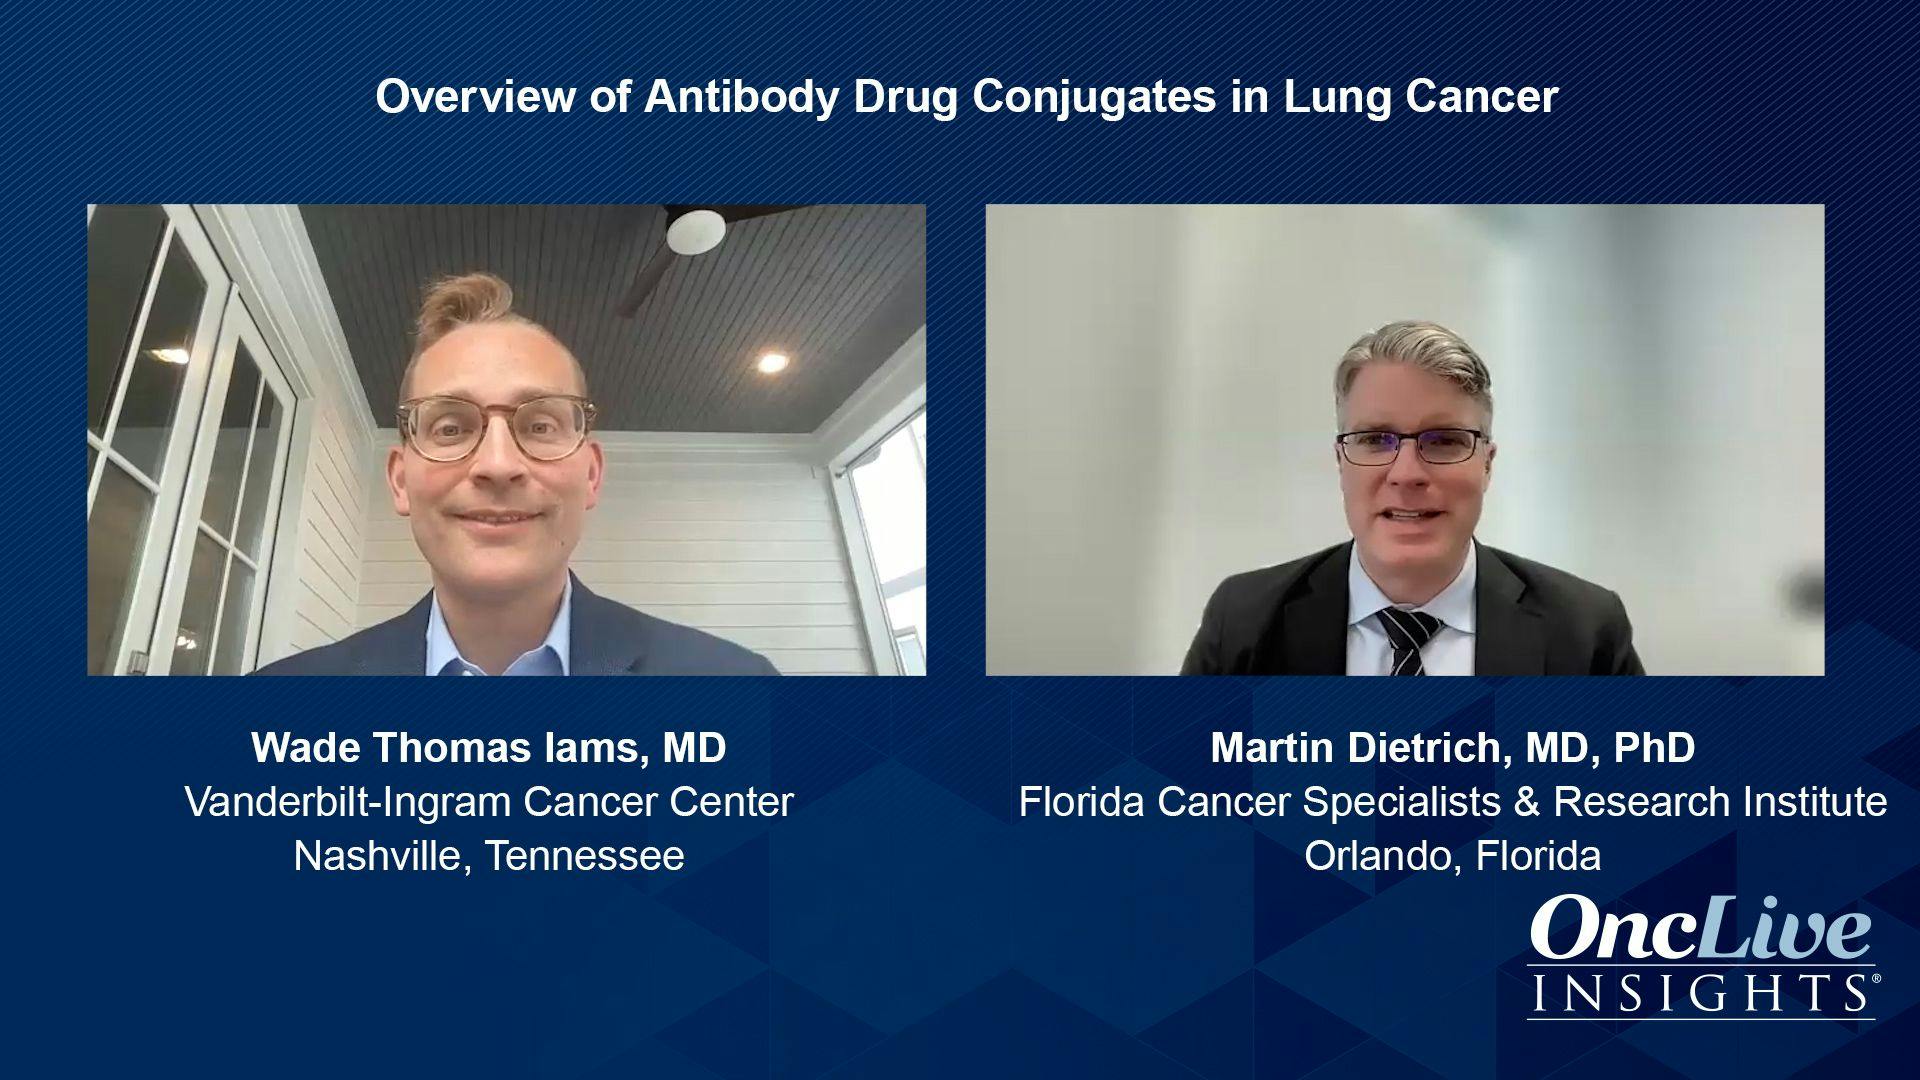 ADCs in Development for the Treatment of Lung Cancer